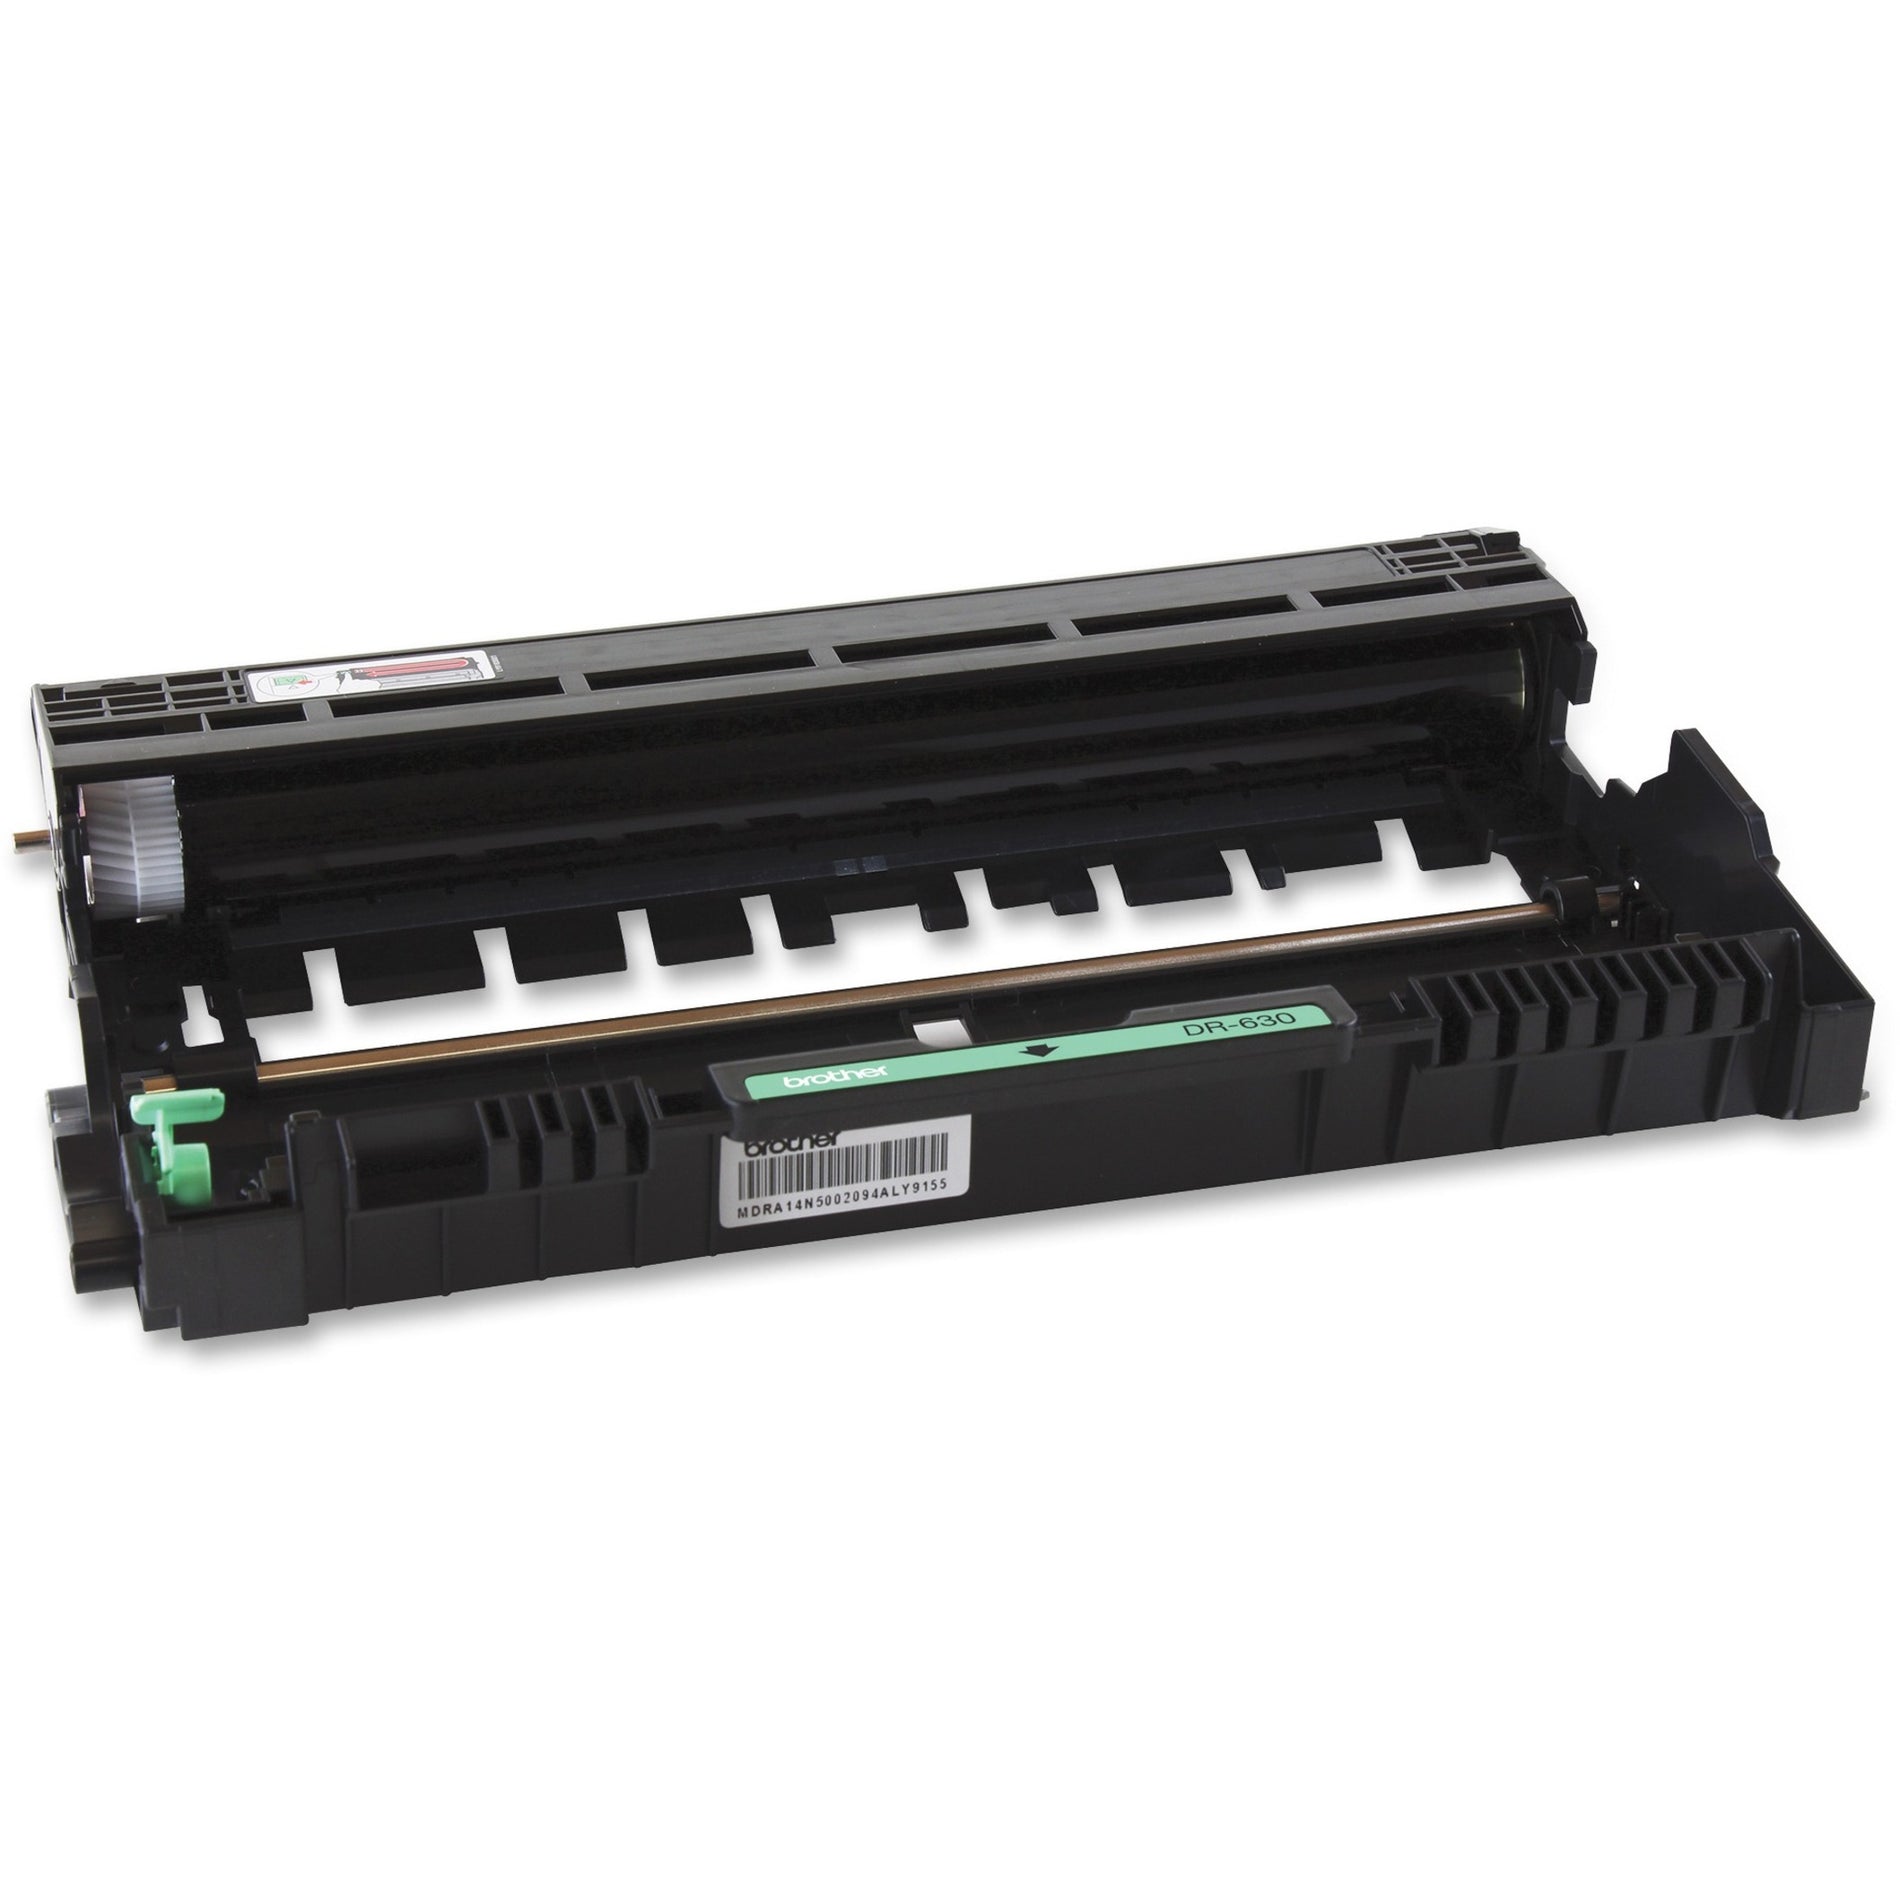 Brother DR630 Drum Unit, 12,000 Page Yield, Black - Genuine Brother Drum for HL-L2360DW Printer